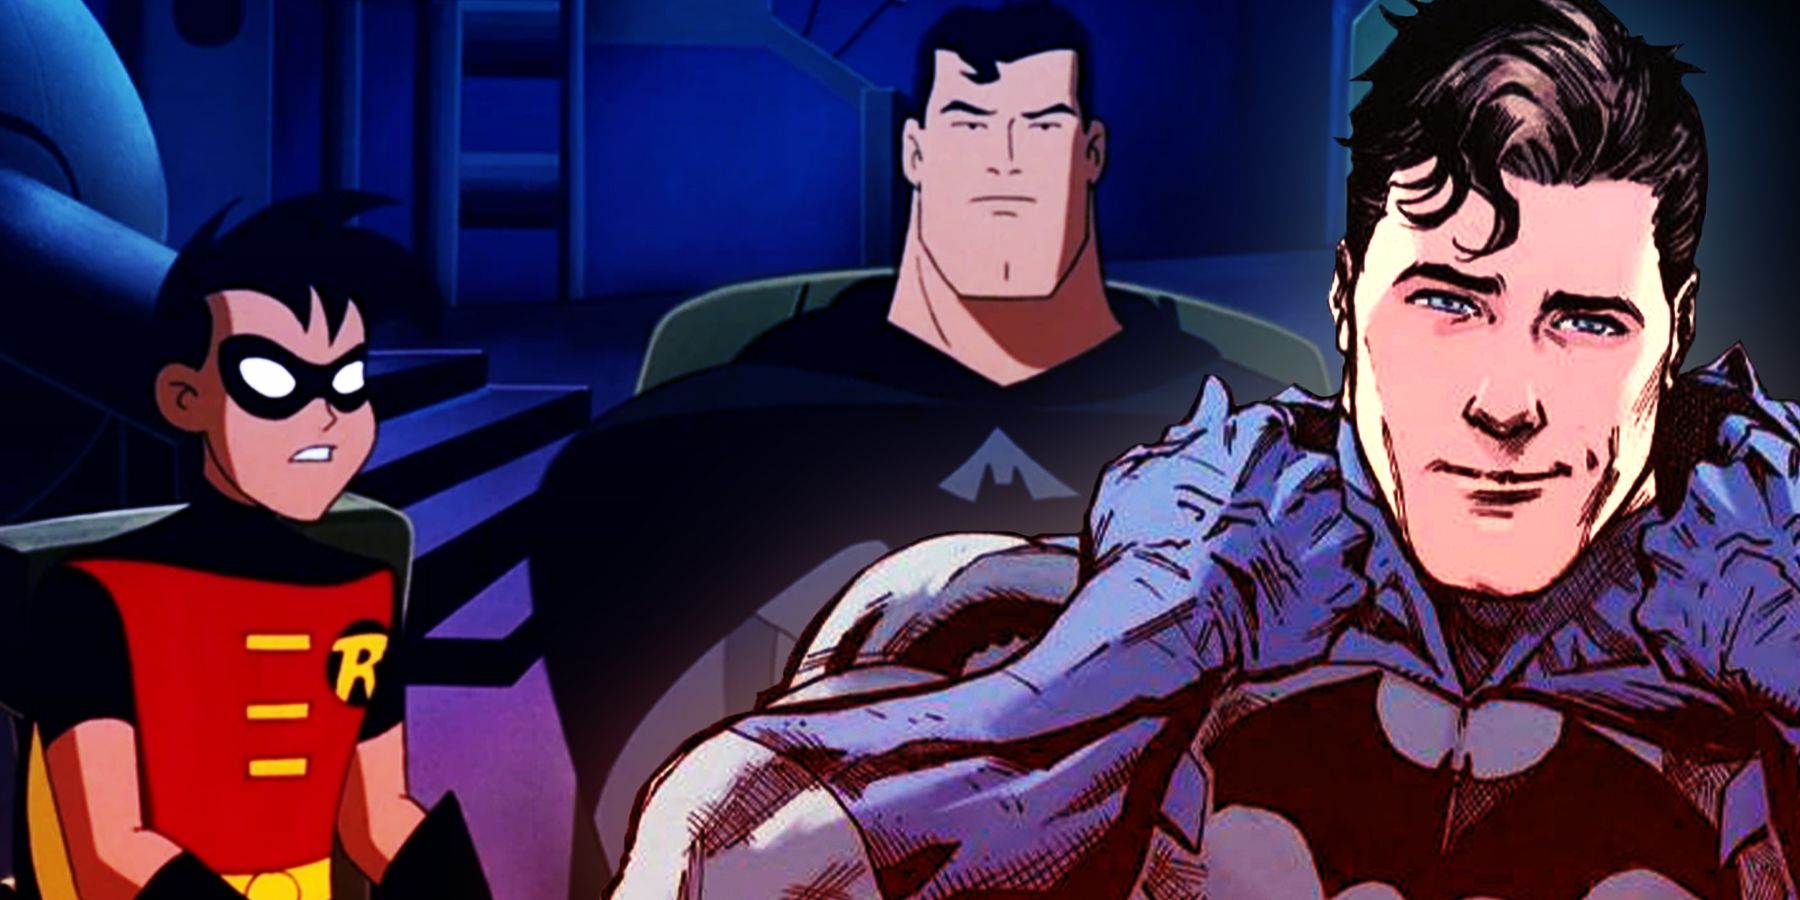 On the left, Robin sits with Superman (who is dressed as Batman) in the Batcave. On the right, Superman takes off the Batman cowl.